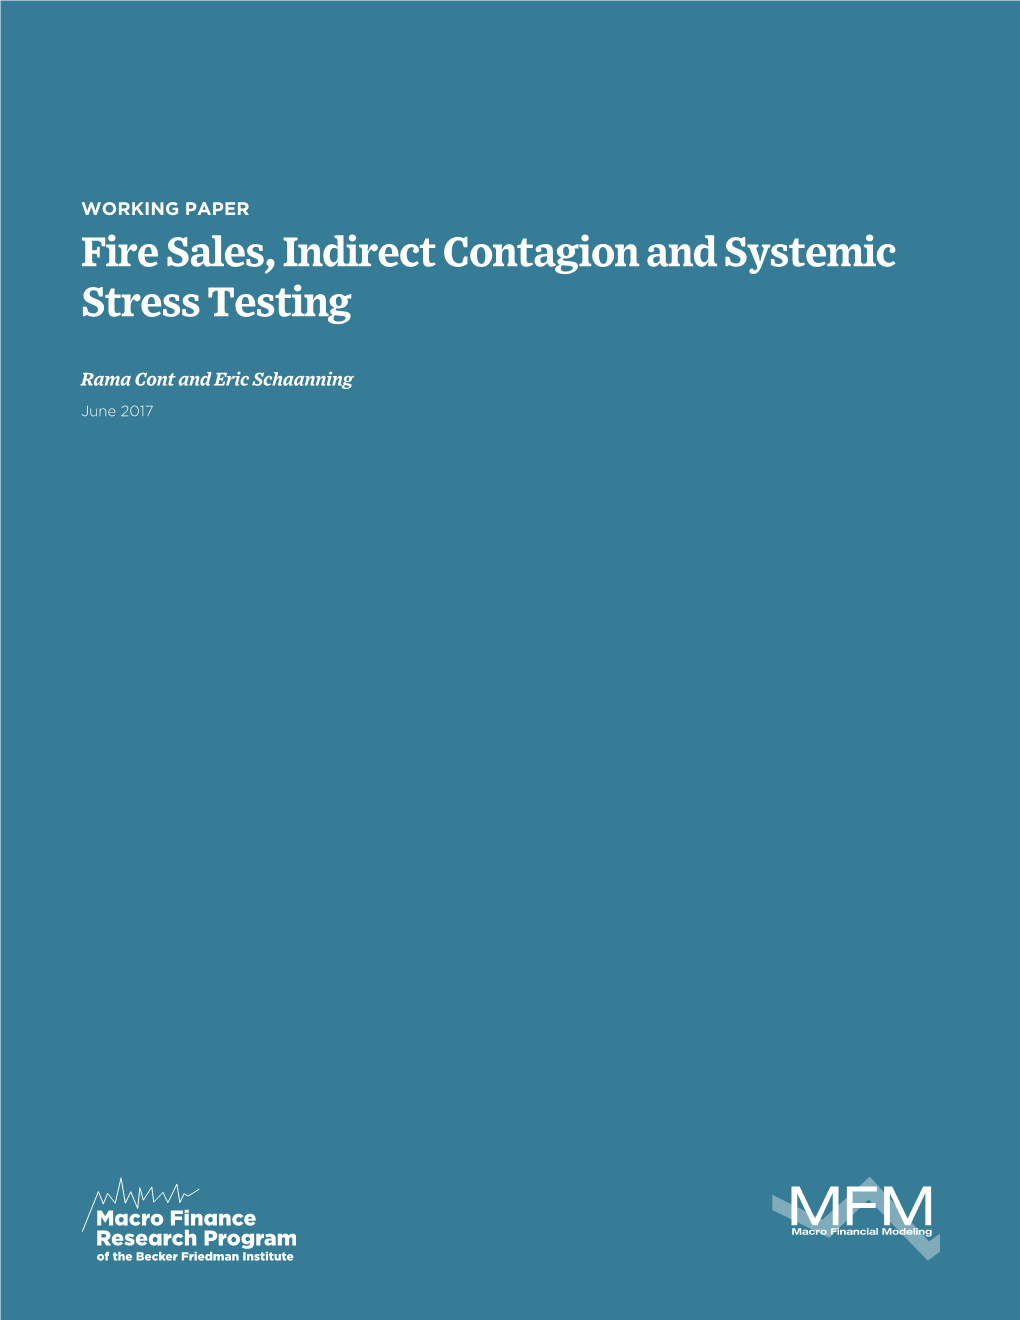 Fire Sales, Indirect Contagion and Systemic Stress Testing